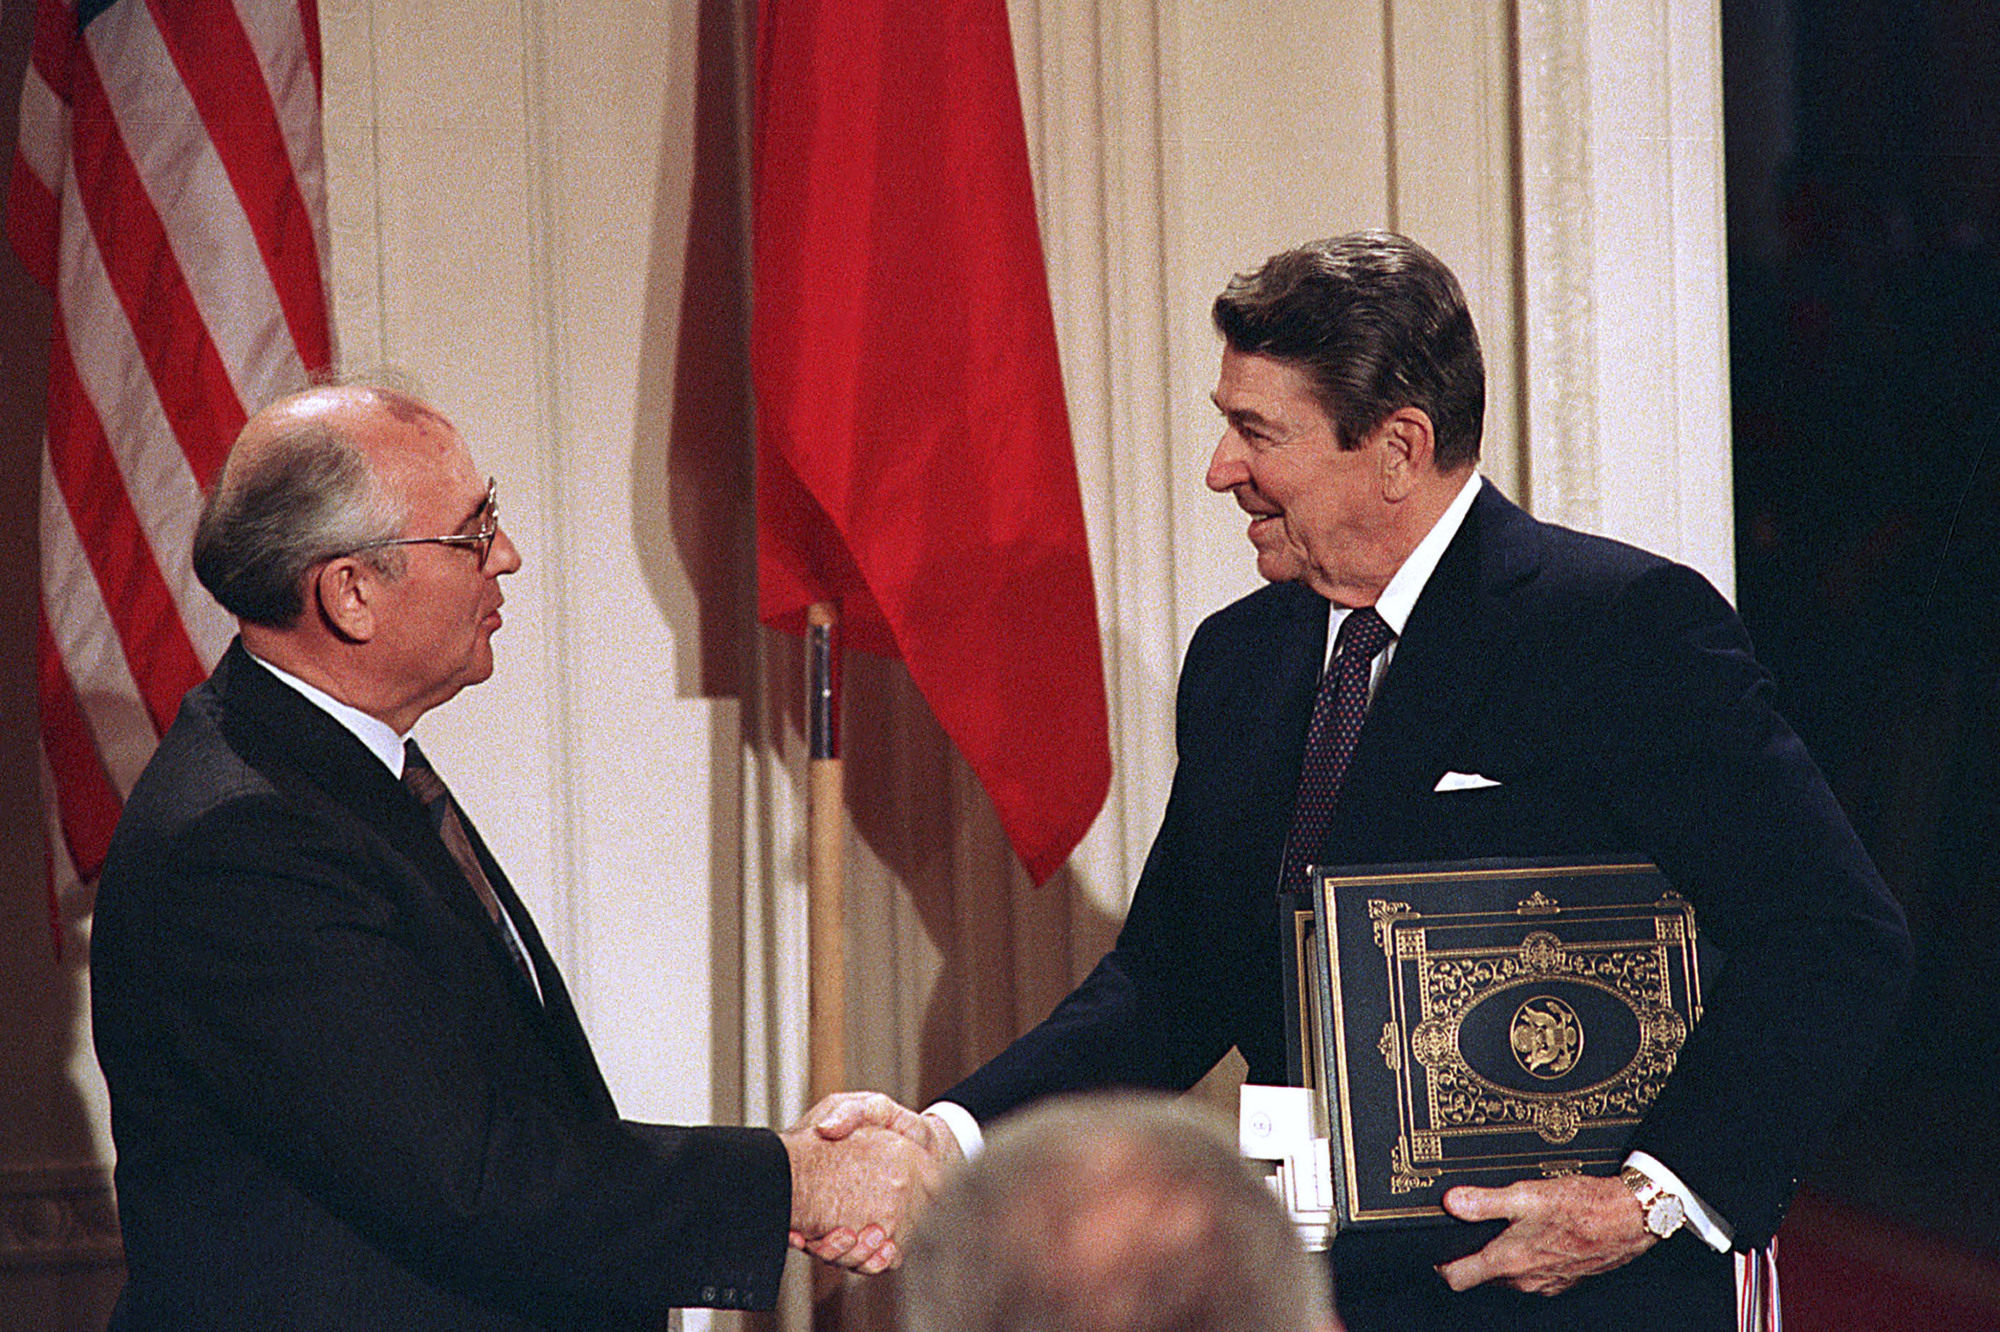 Soviet leader Mikhail Gorbachev and U.S. President Ronald Reagan shake hands after signing the Intermediate Range Nuclear Forces Treaty at the White House on Dec. 8, 1987. | AP